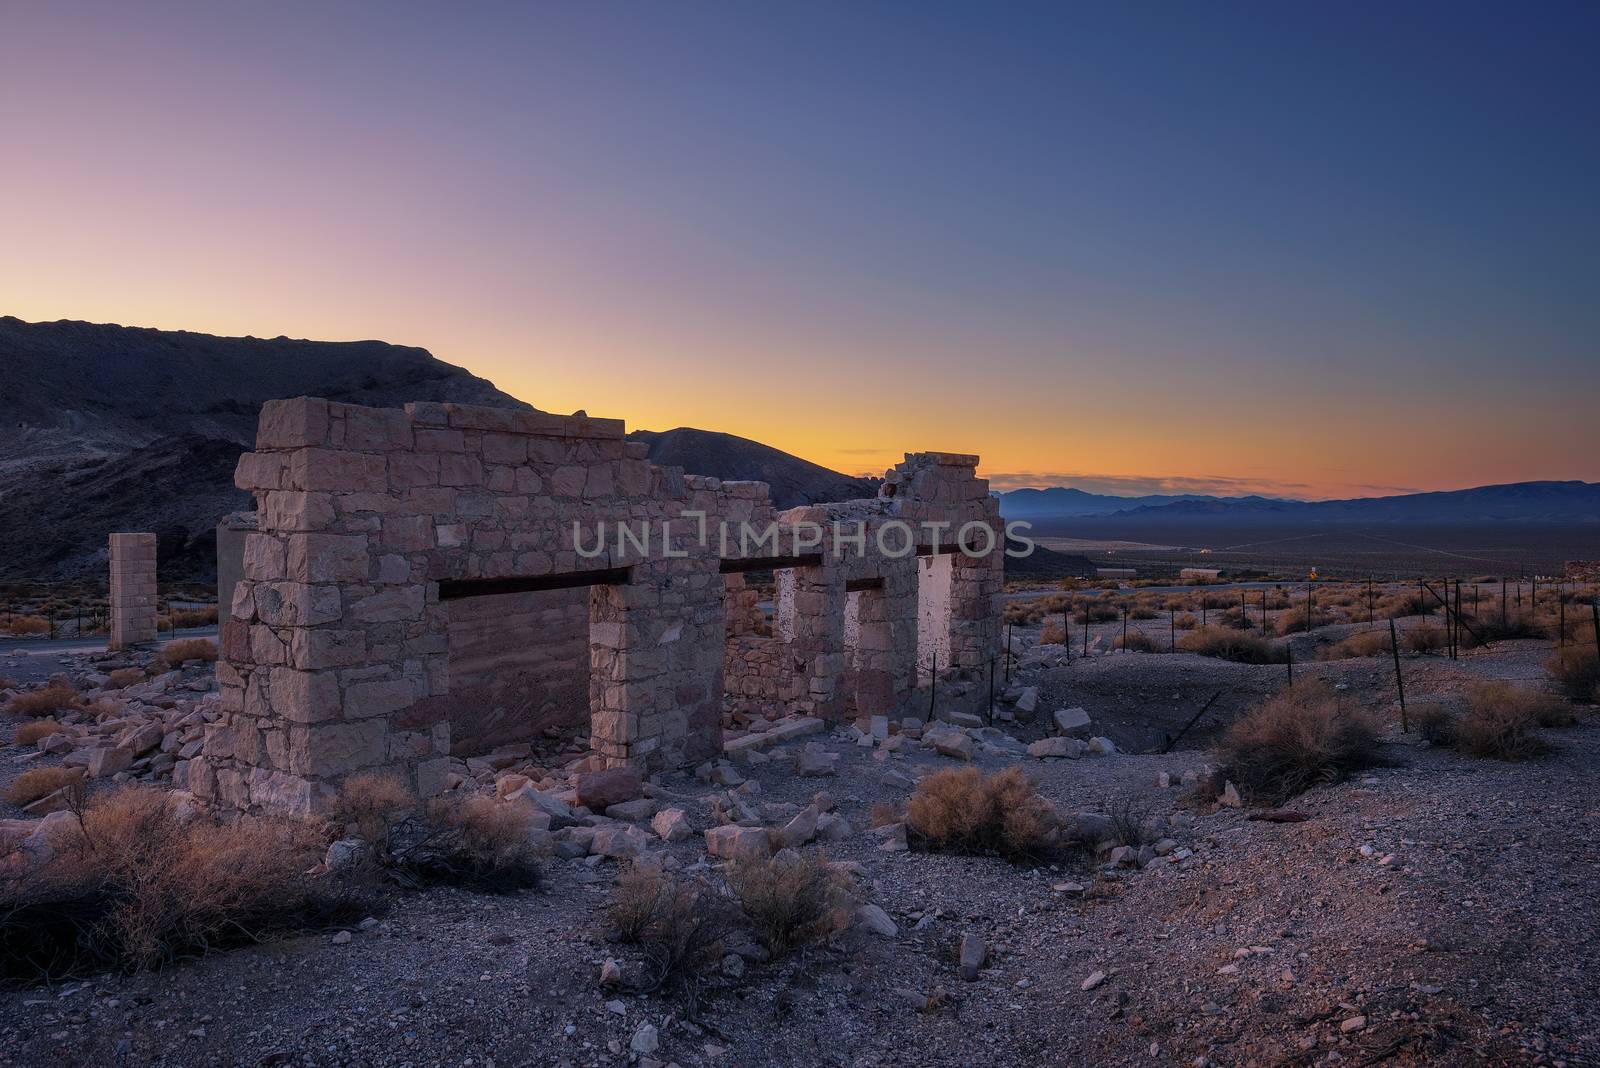 Sunrise above ruined building in the town of Rhyolite, Nevada. This ghost town is located in Nye County among Bullfrog Hills near Death Valley.